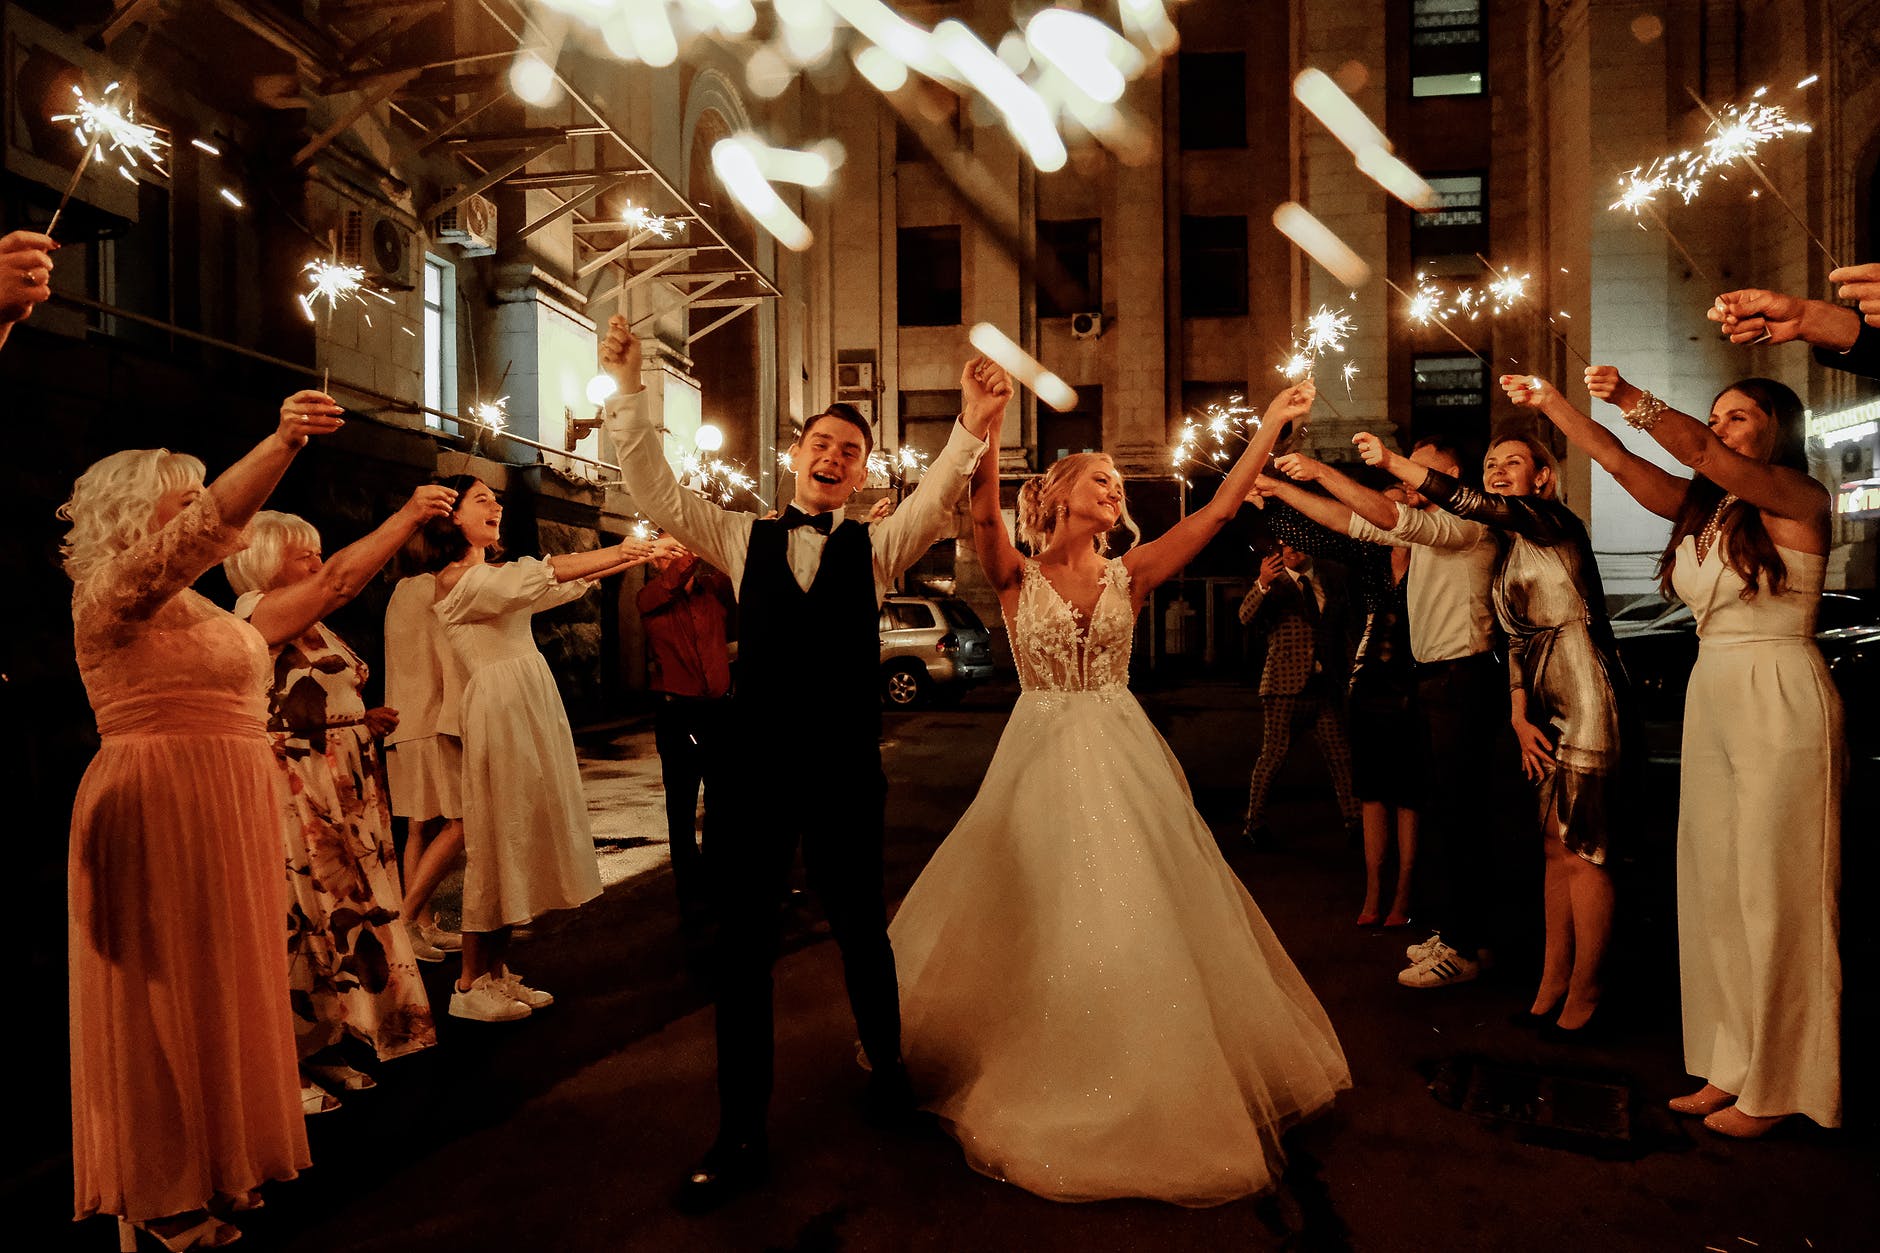 An intimate wedding party | Photo: Pexels